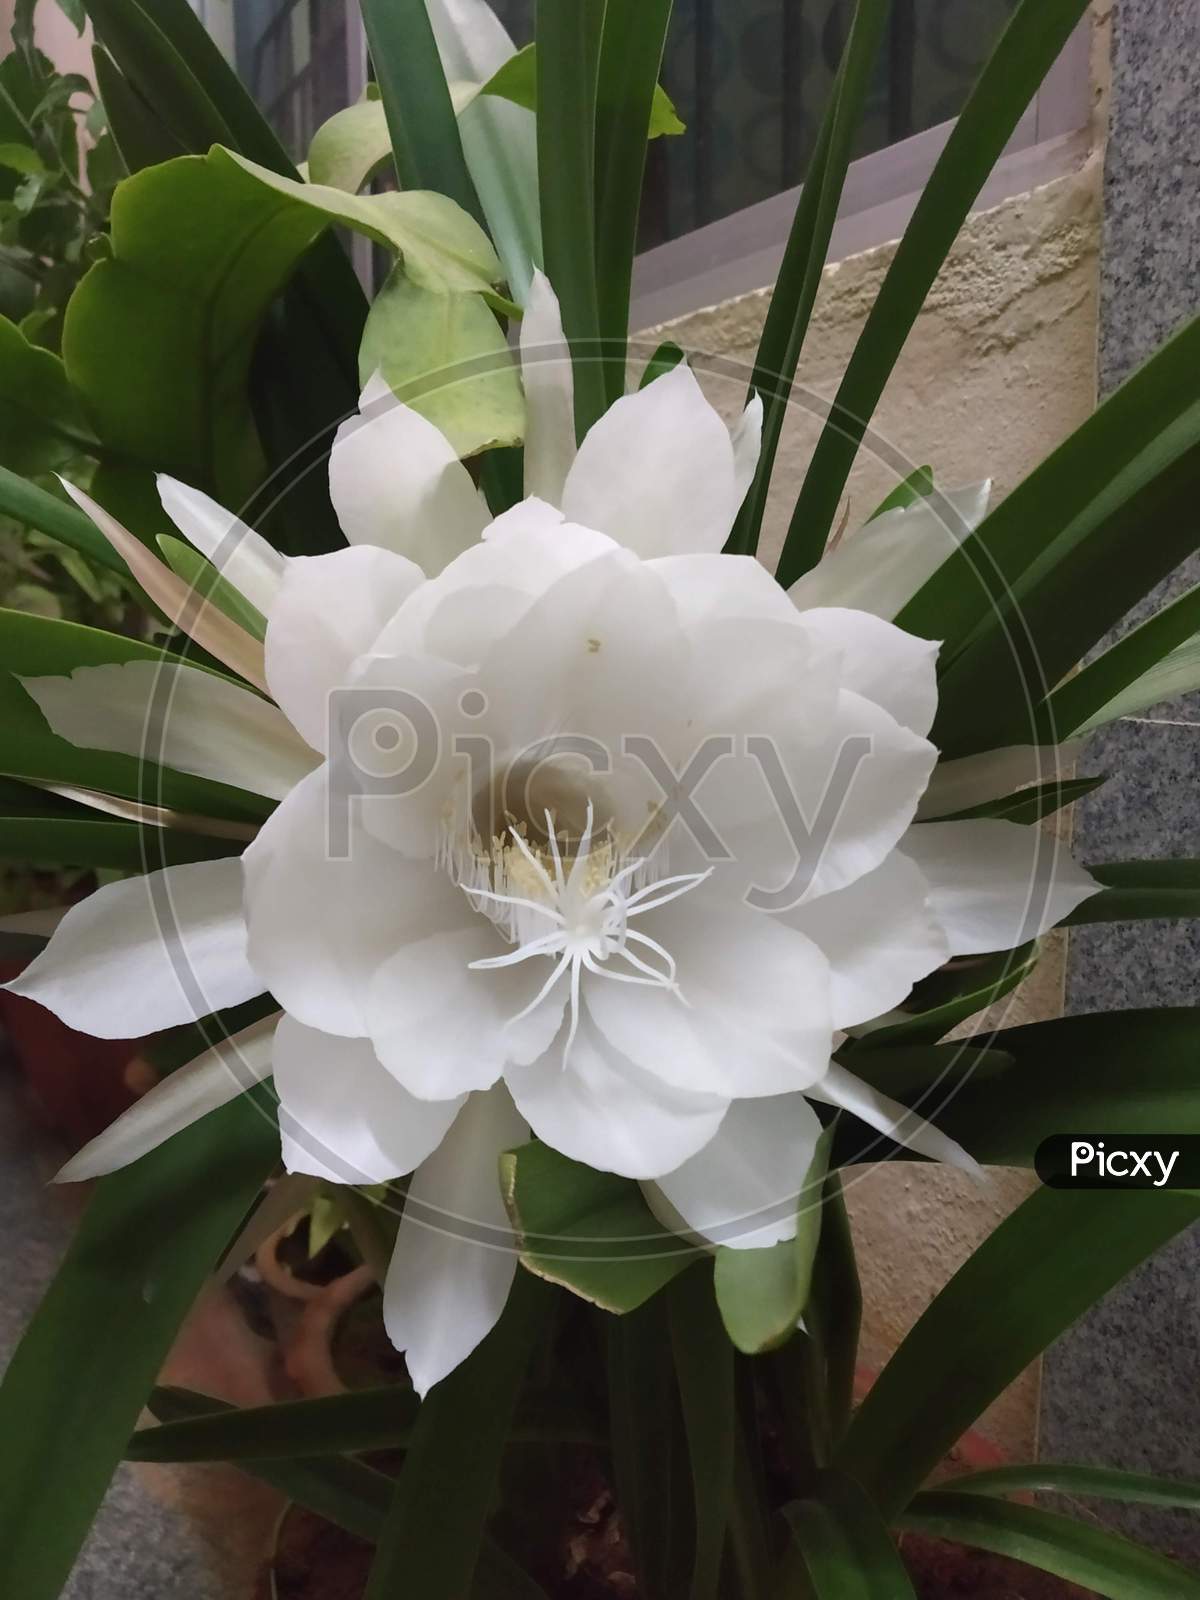 Brahma Kamal or Saussurea obvallata, commonly known as Night-blooming Cereus, Queen of the night, Lady of the night